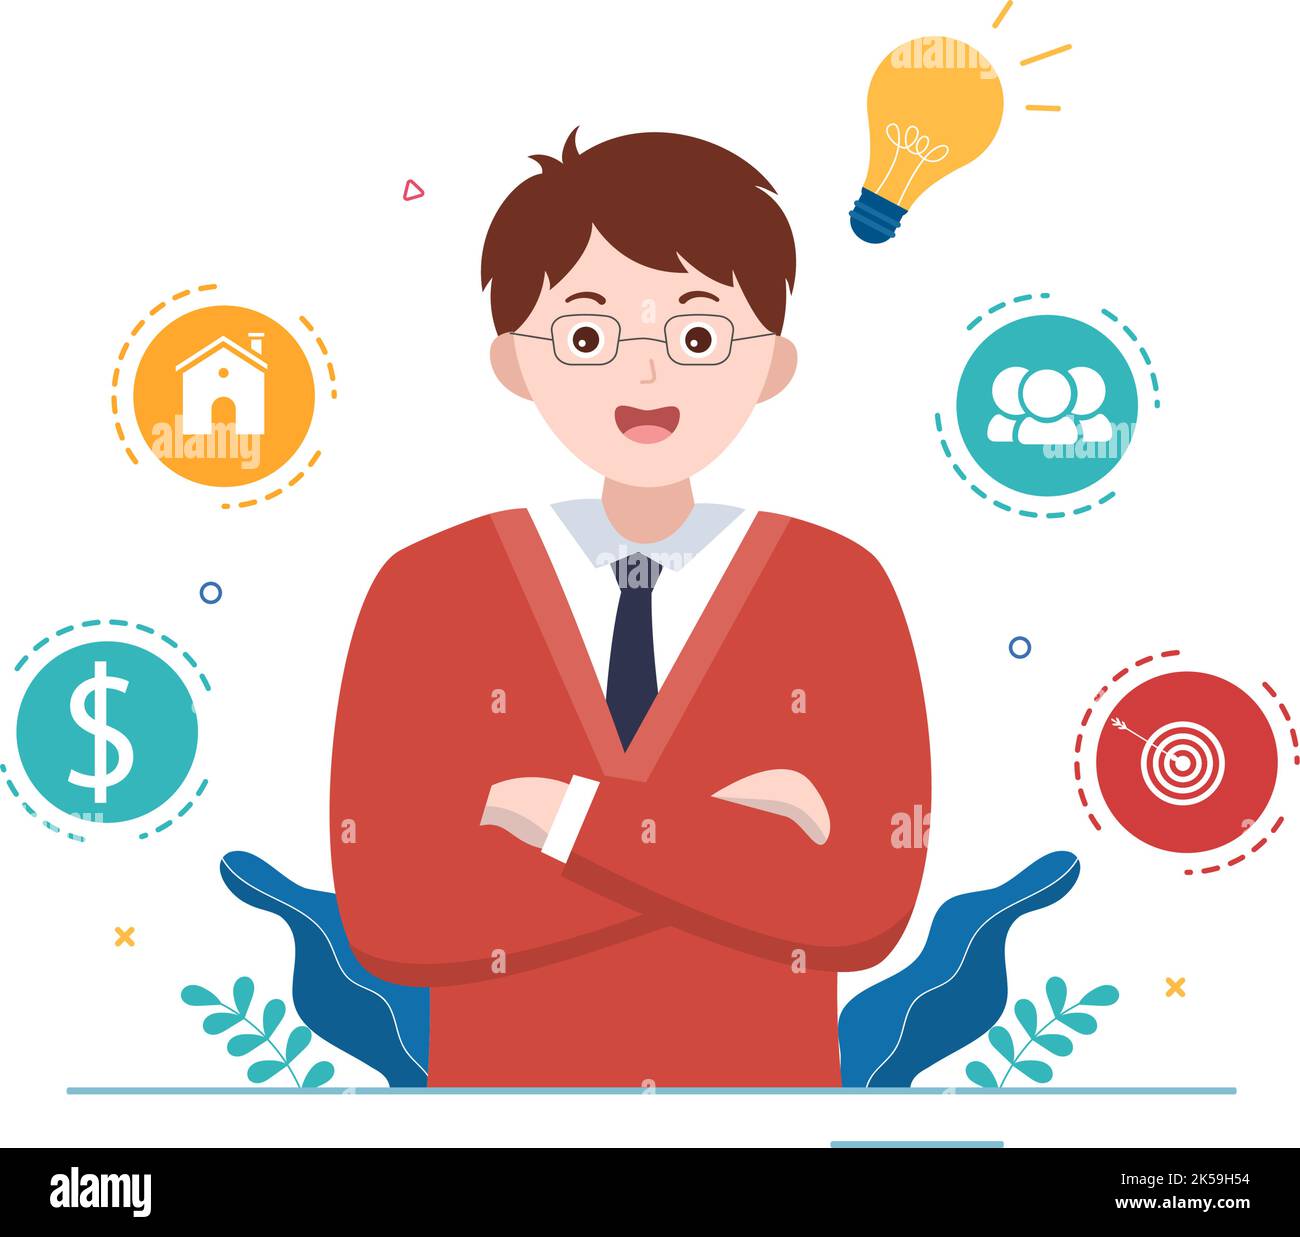 Life Coach for Consultation, Education, Motivation, Mentoring Perspective and Self Coaching in Template Hand Drawn Cartoon Flat Illustration Stock Vector